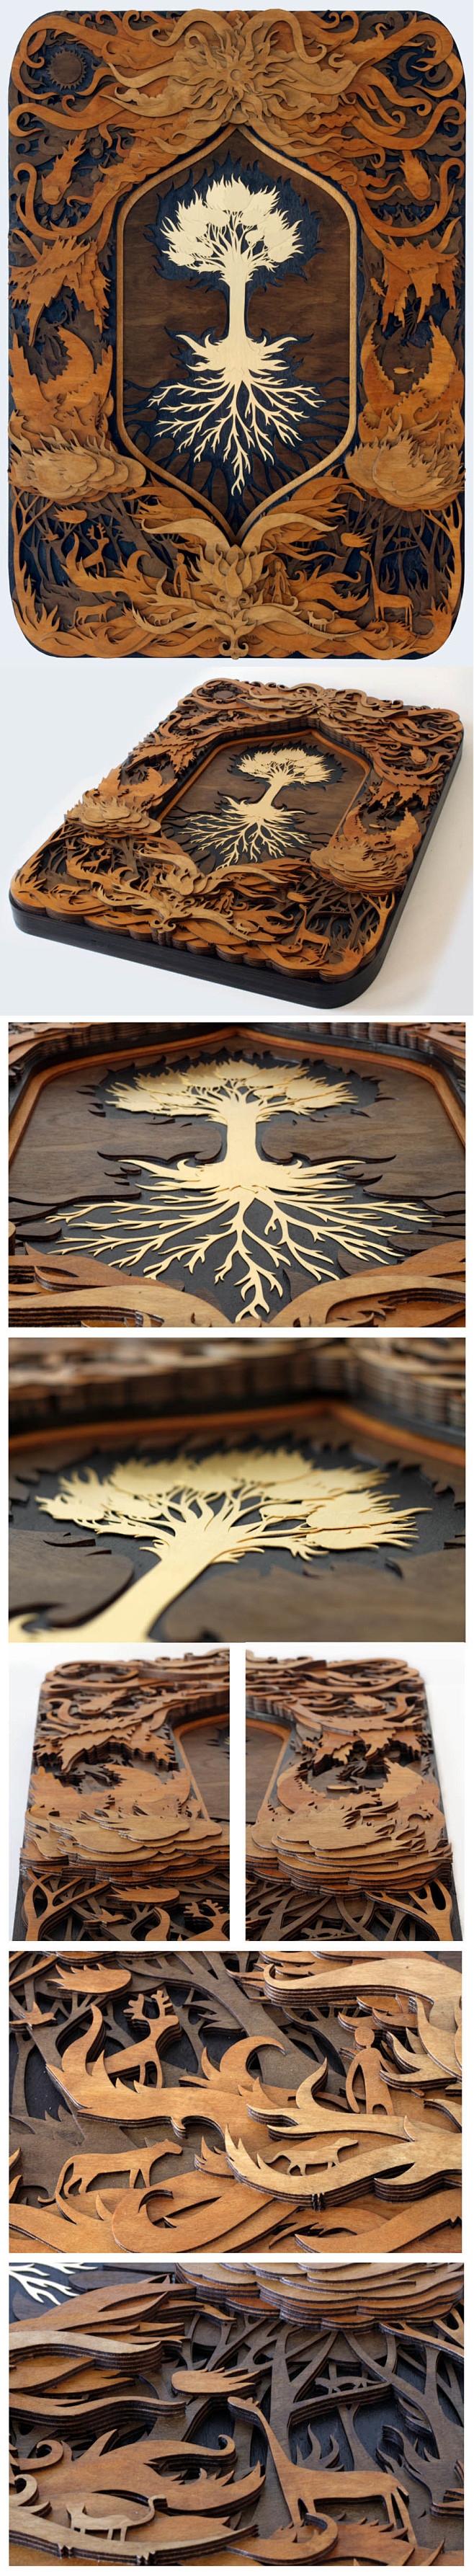 The Tree of Life by ...